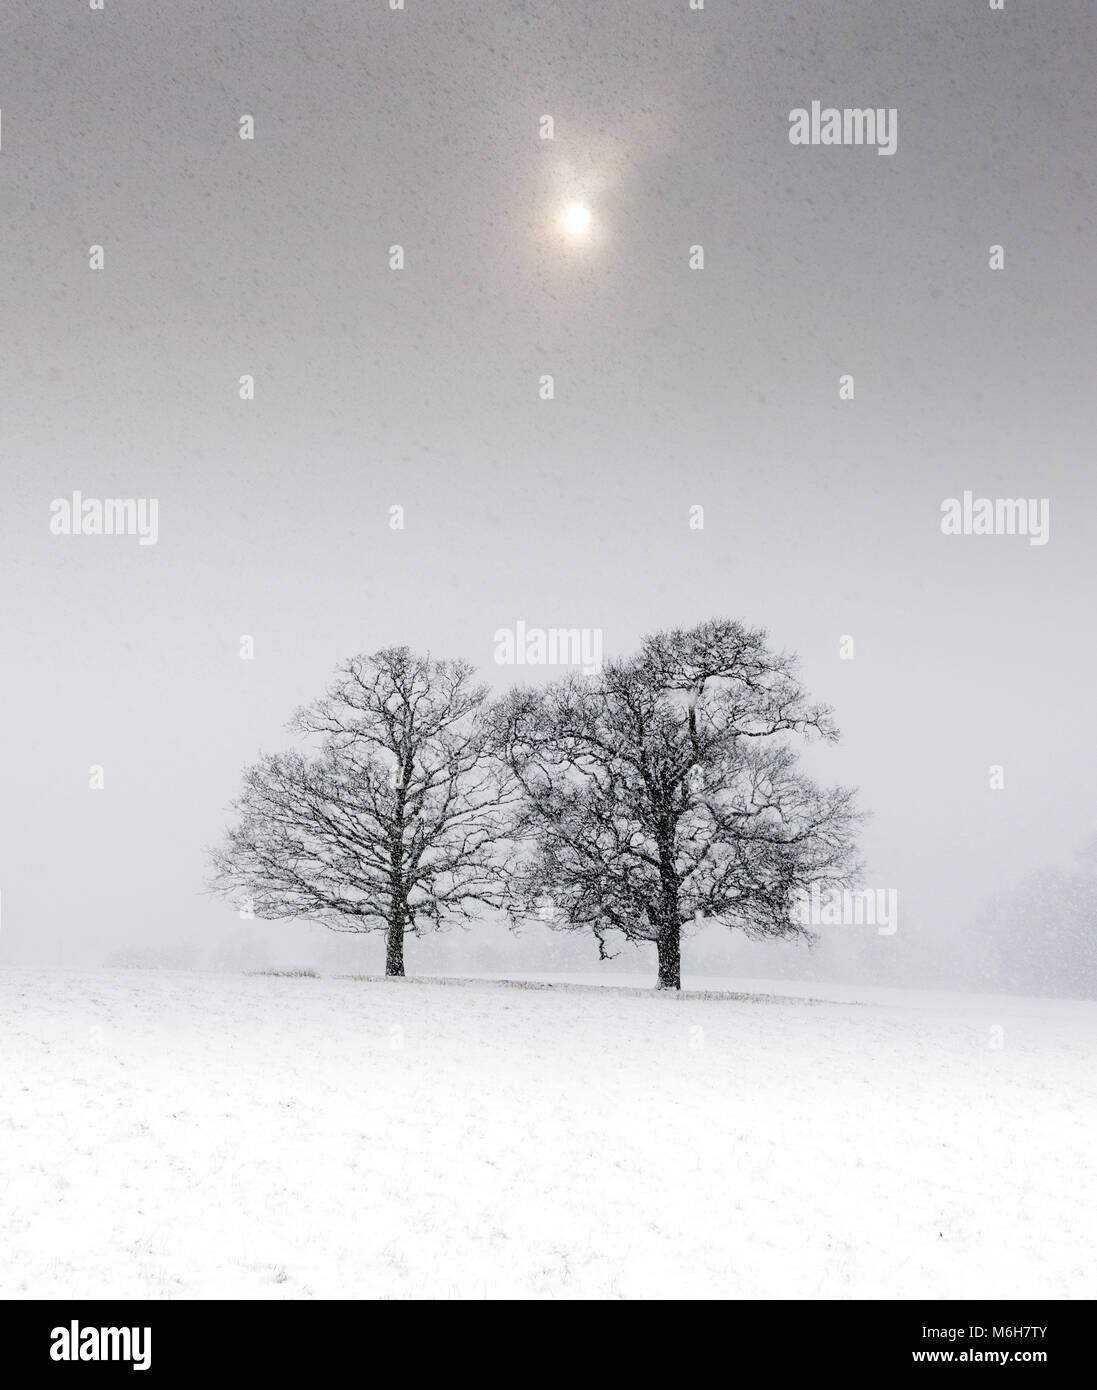 Two trees in a snow covered field under a pale sun Stock Photo